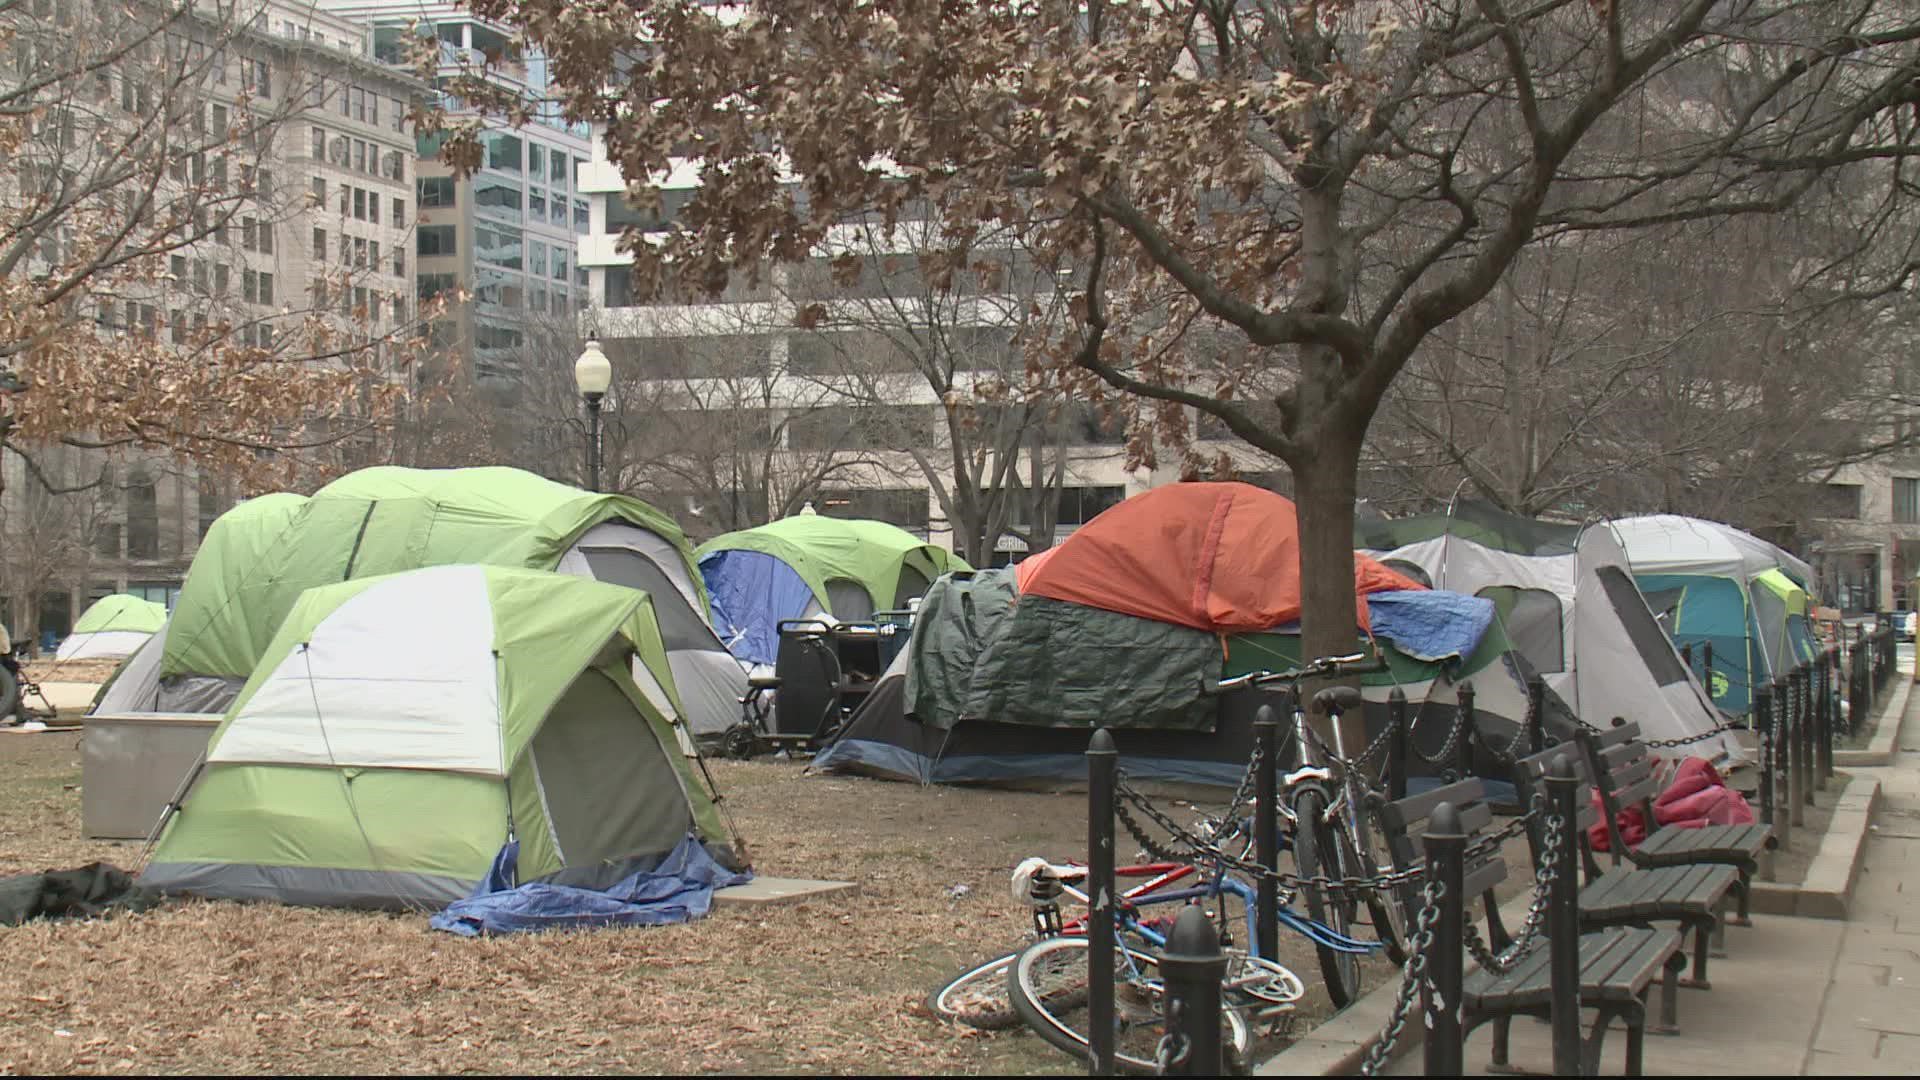 This so-called 'tent city' is at McPherson Square - about two block northeast of the White House.
U-S Park Police have announced plans to clear the area by mid-April